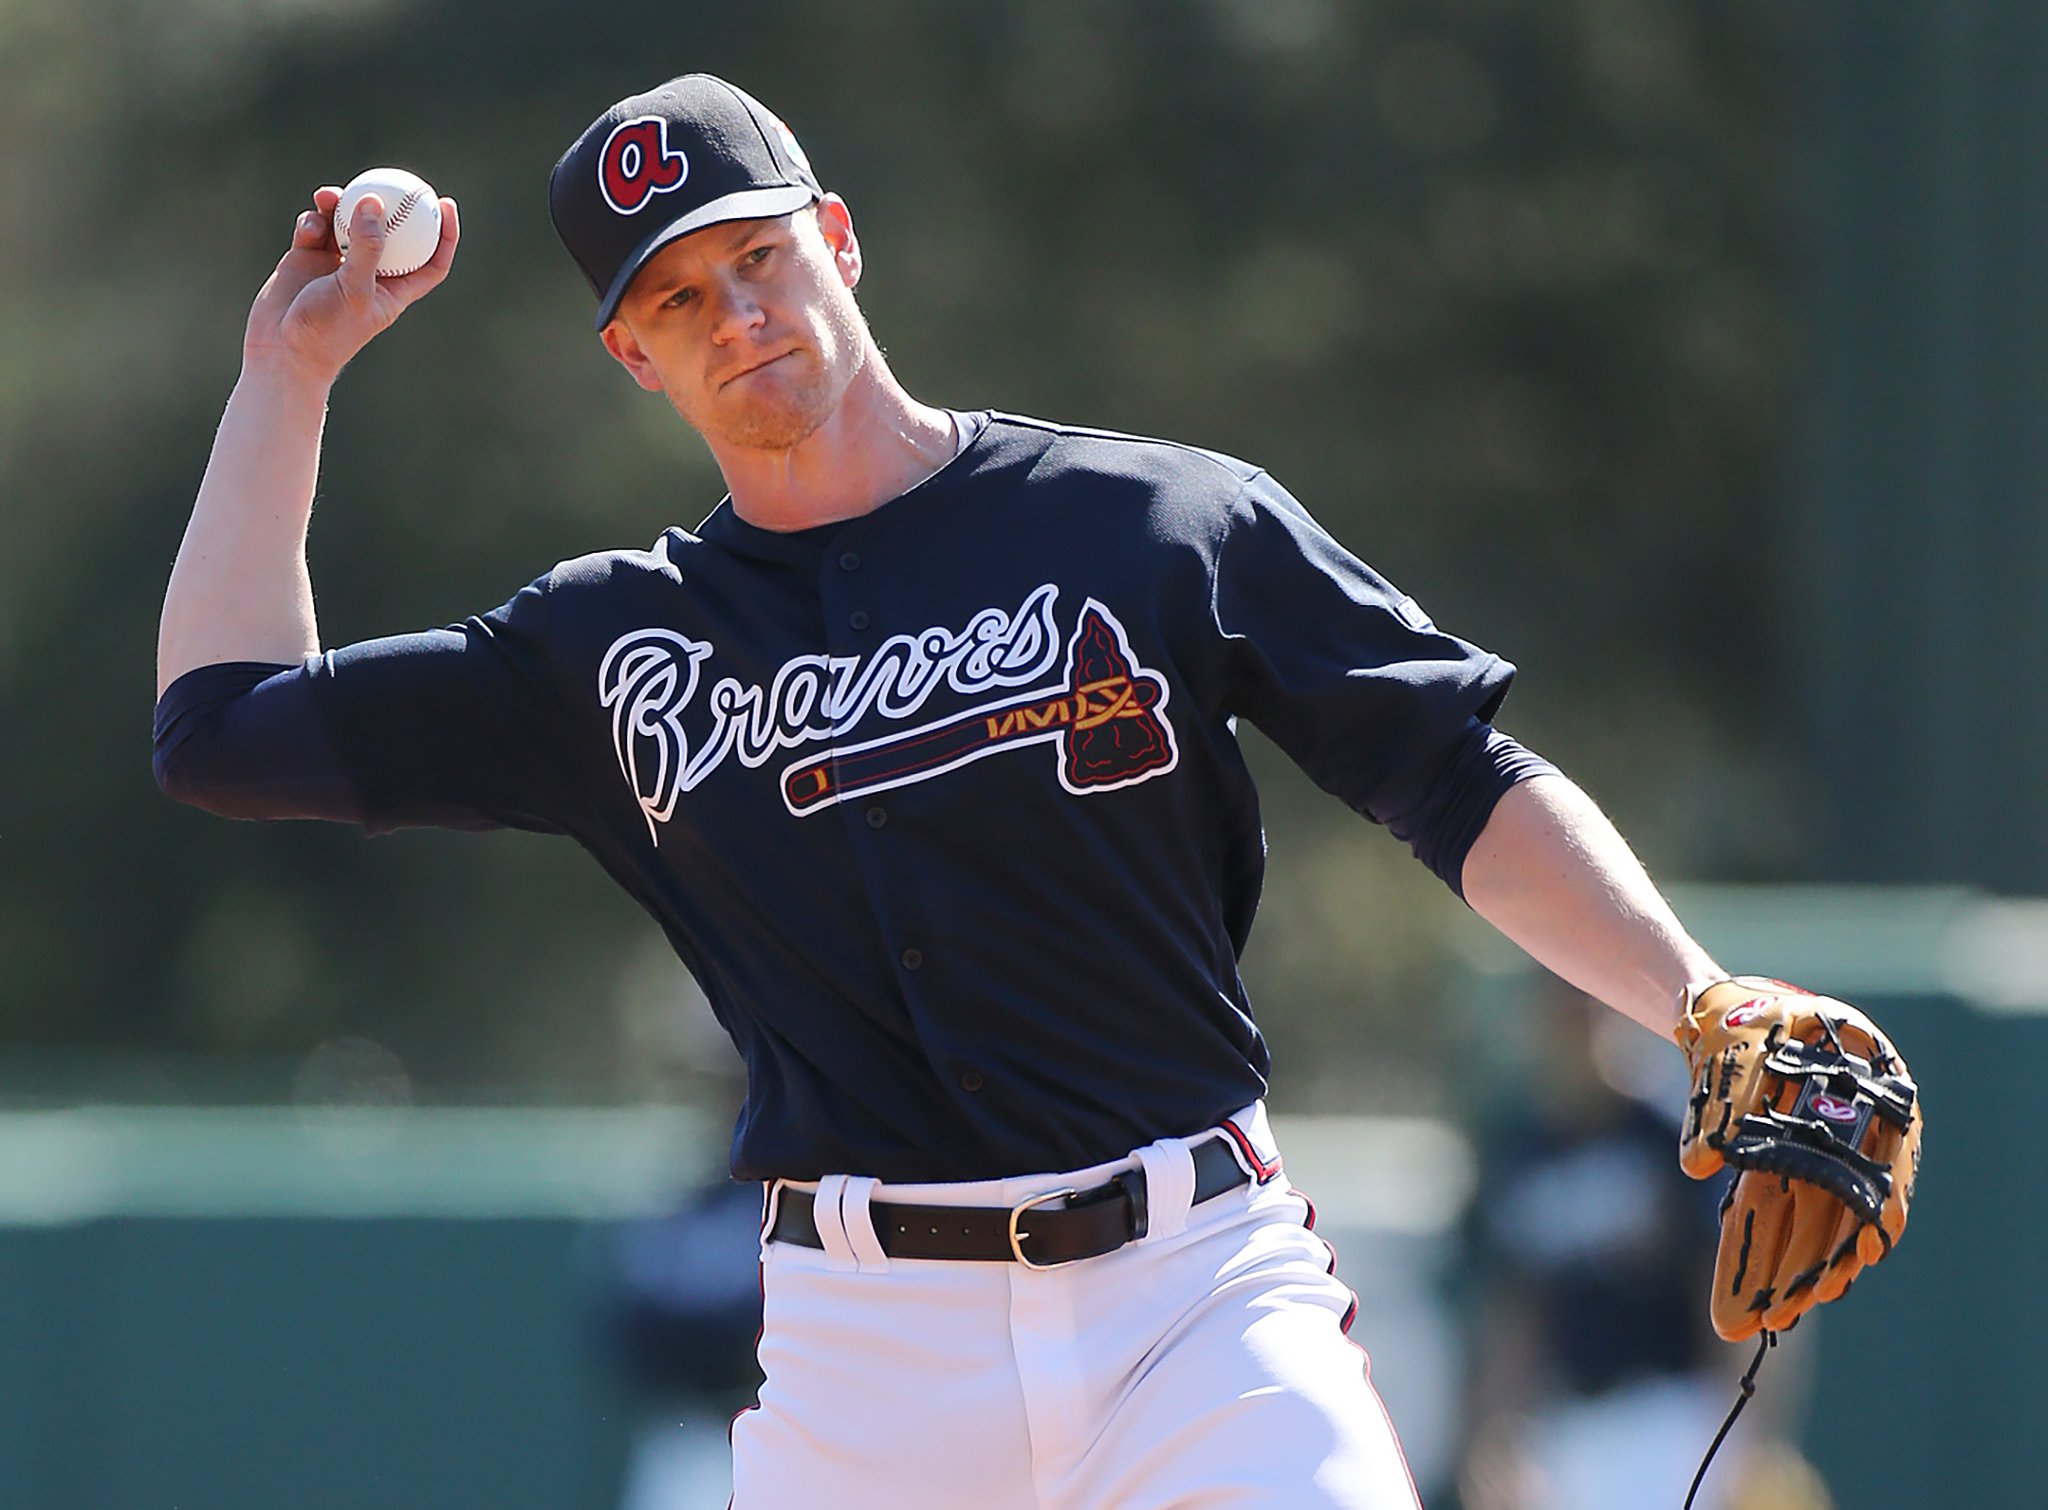 Gordon Beckham is expected to be activated from Braves DL Tuesday